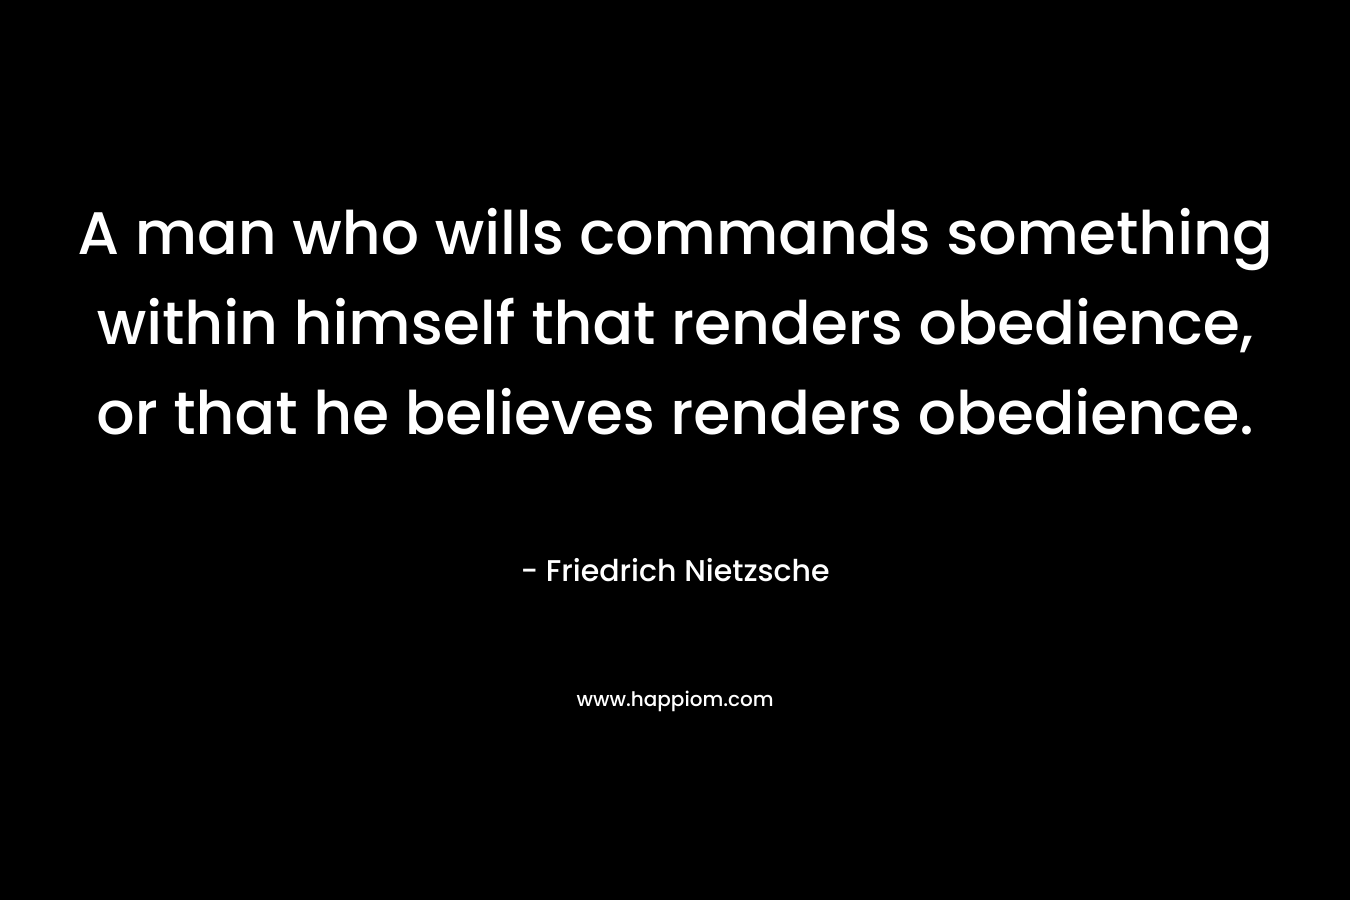 A man who wills commands something within himself that renders obedience, or that he believes renders obedience.